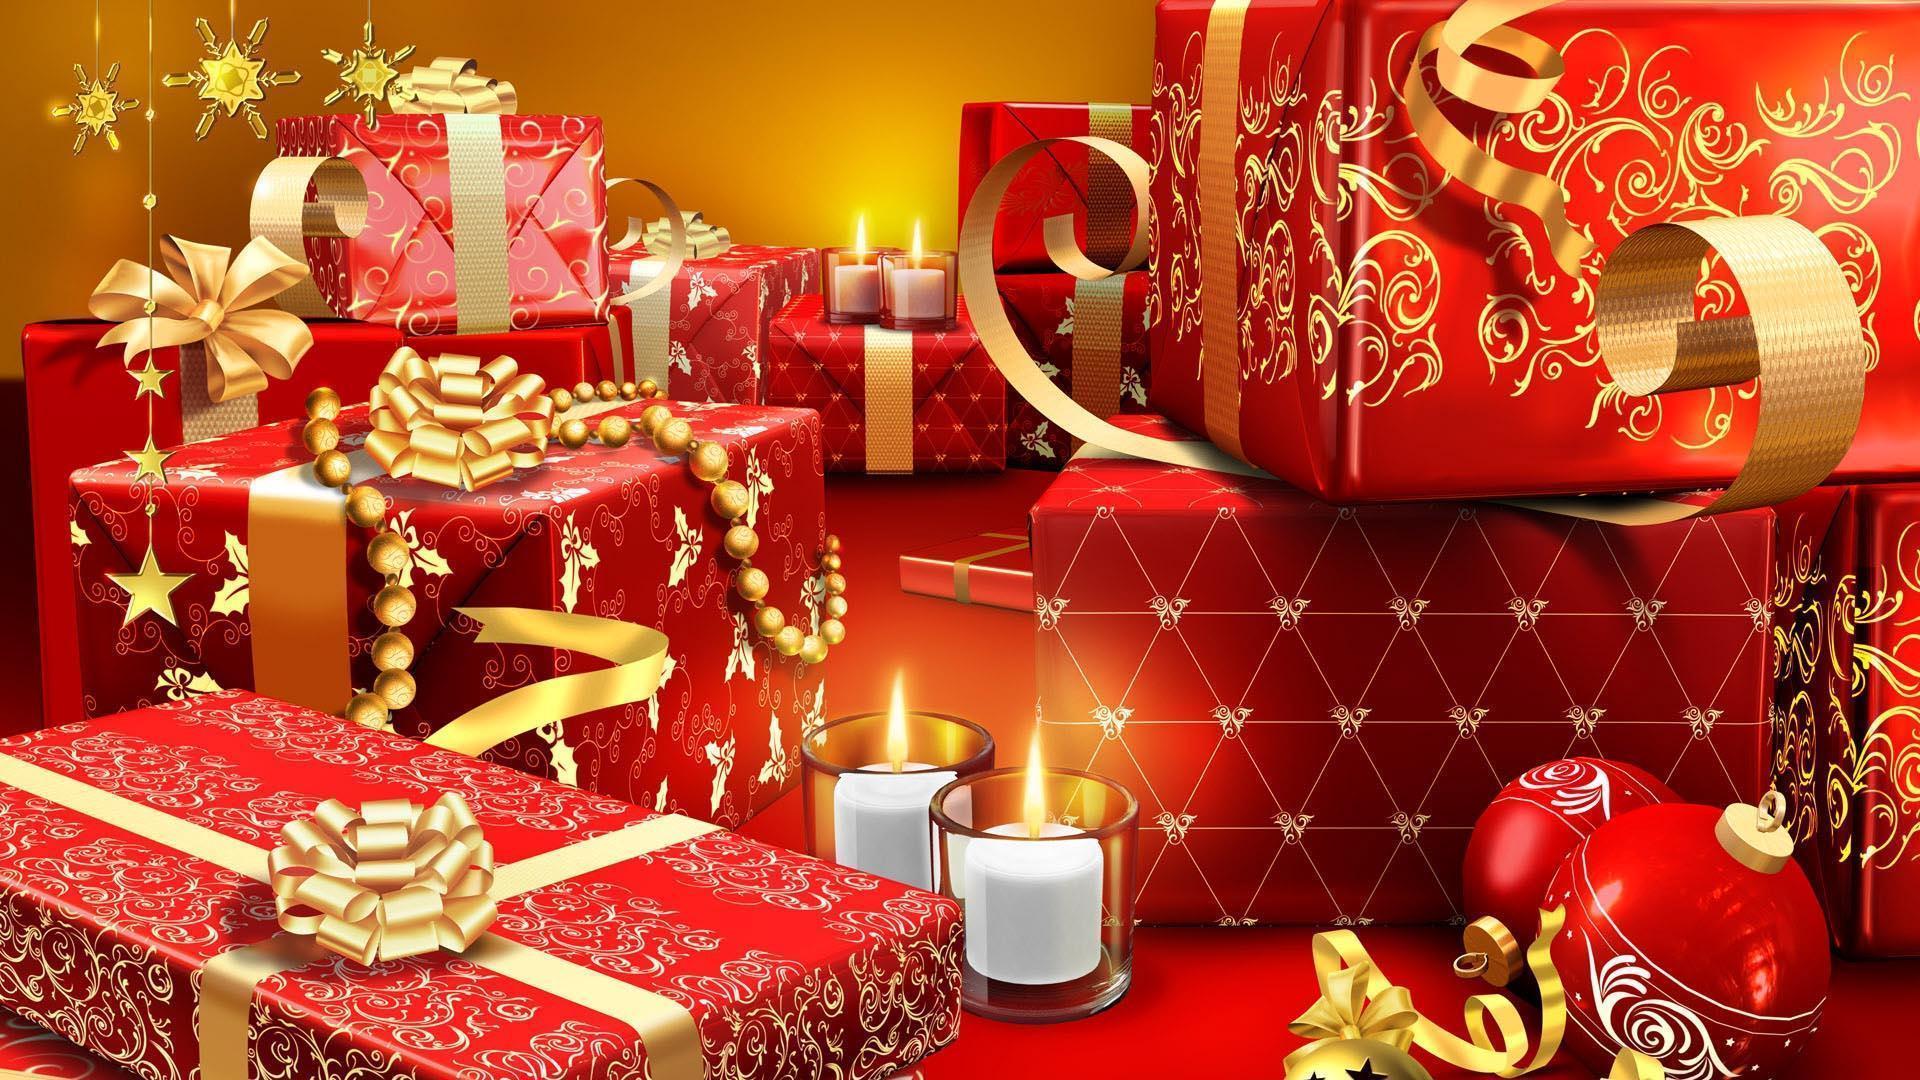 Christmas Presents Wrapped in Red HD large resolution wallpaper